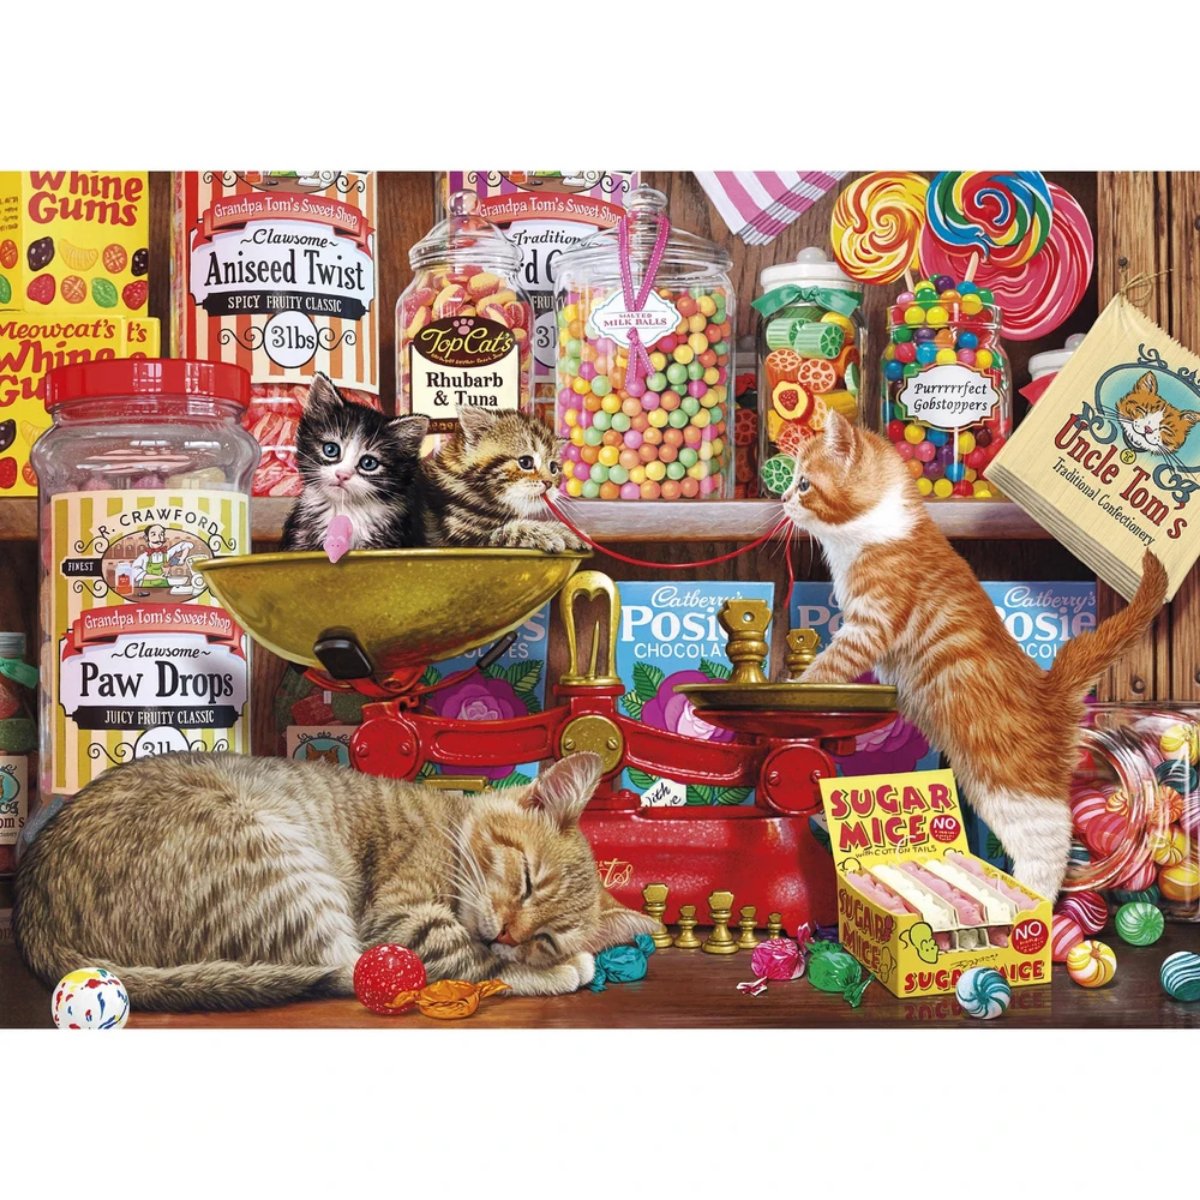 Gibsons Paw Drops & Sugar Mice Jigsaw Puzzle (1000 Pieces) - Phillips Hobbies